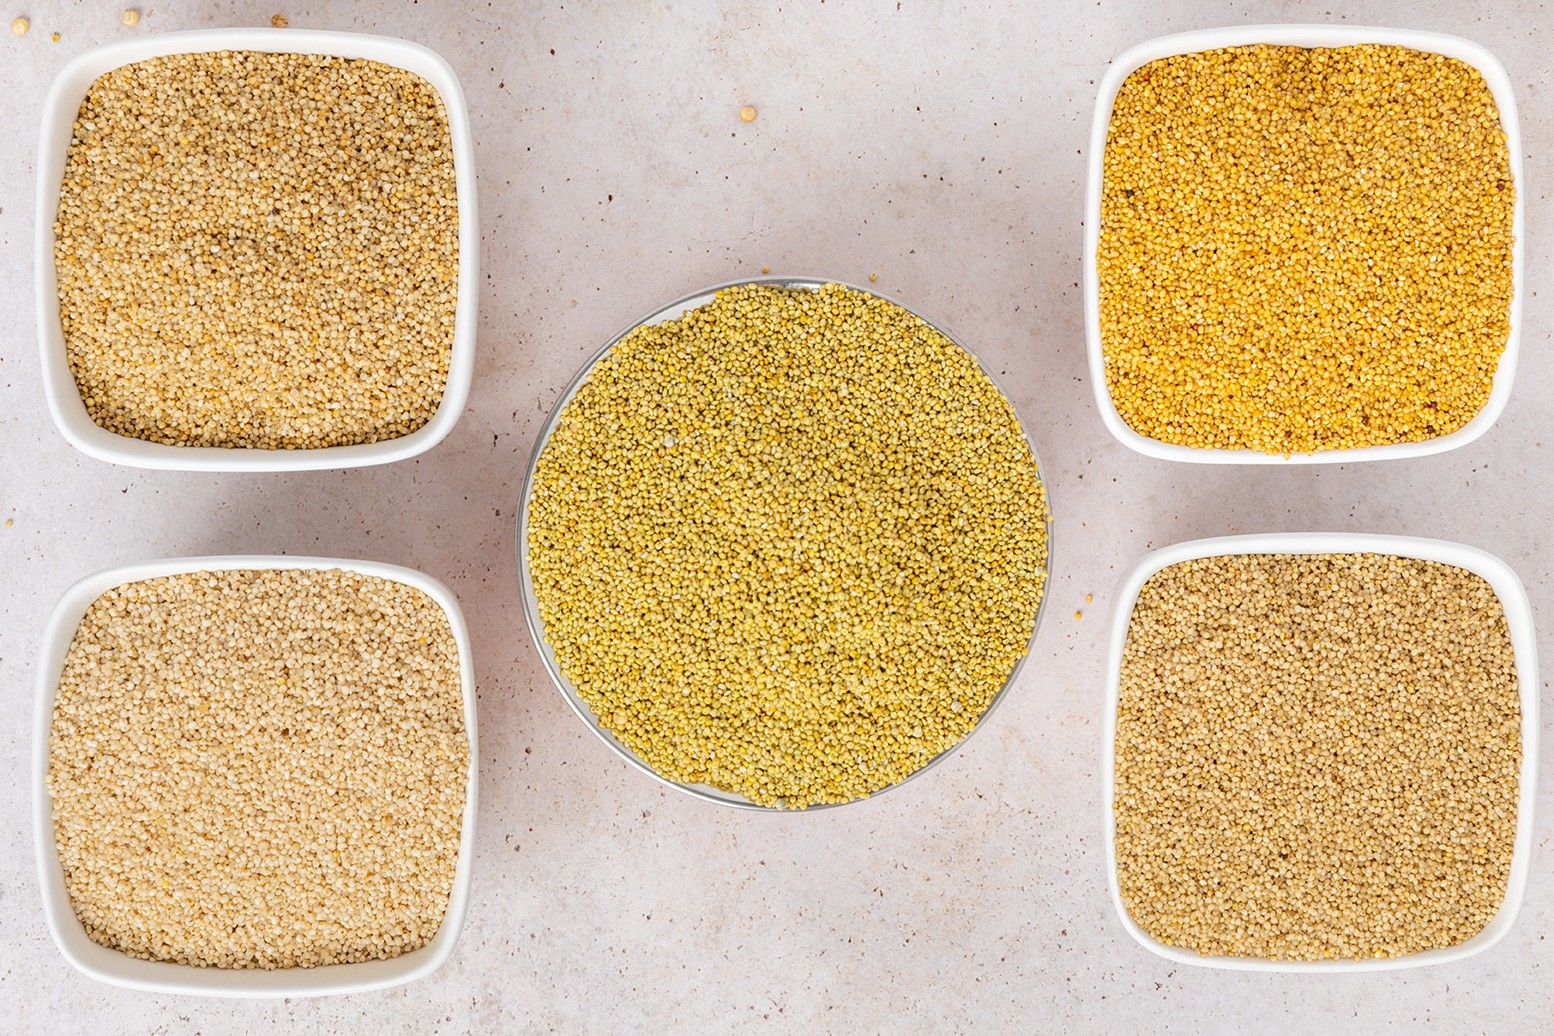 Discover The Magic Of Positive Millets